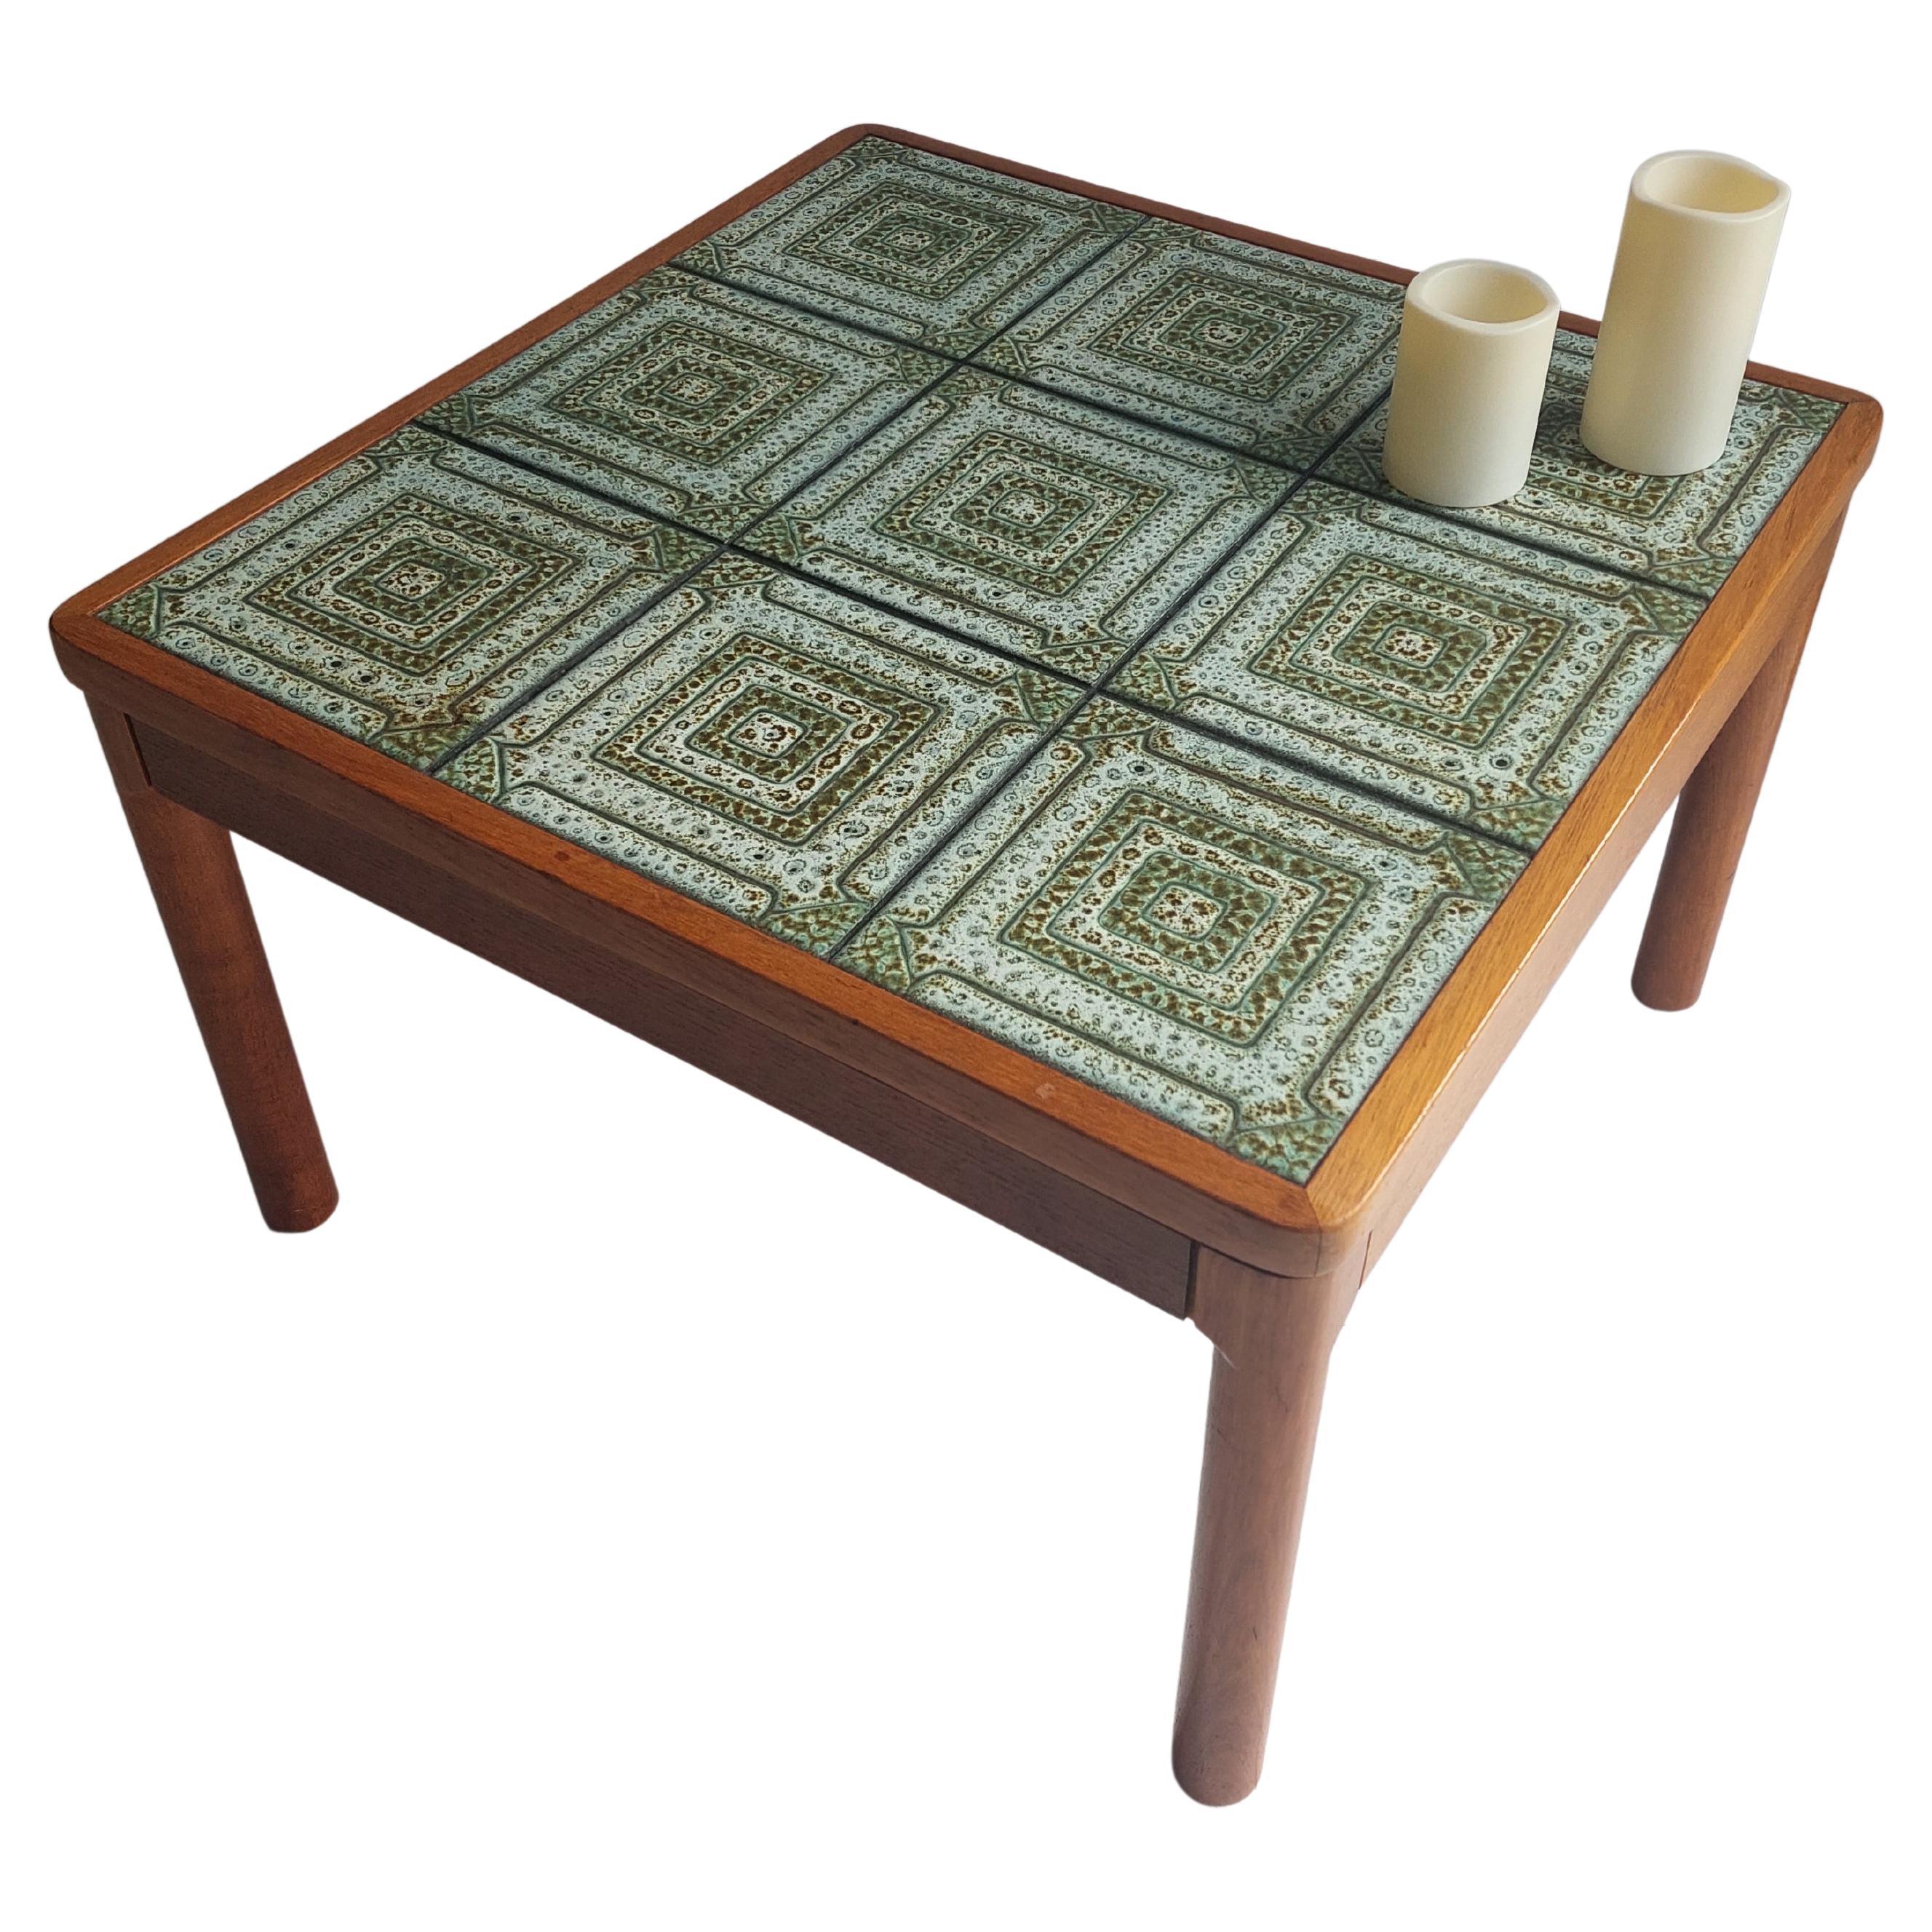 Mid-Century Danish Teak Coffee Table by Trioh 1960s Green Tiled Top Square Shape